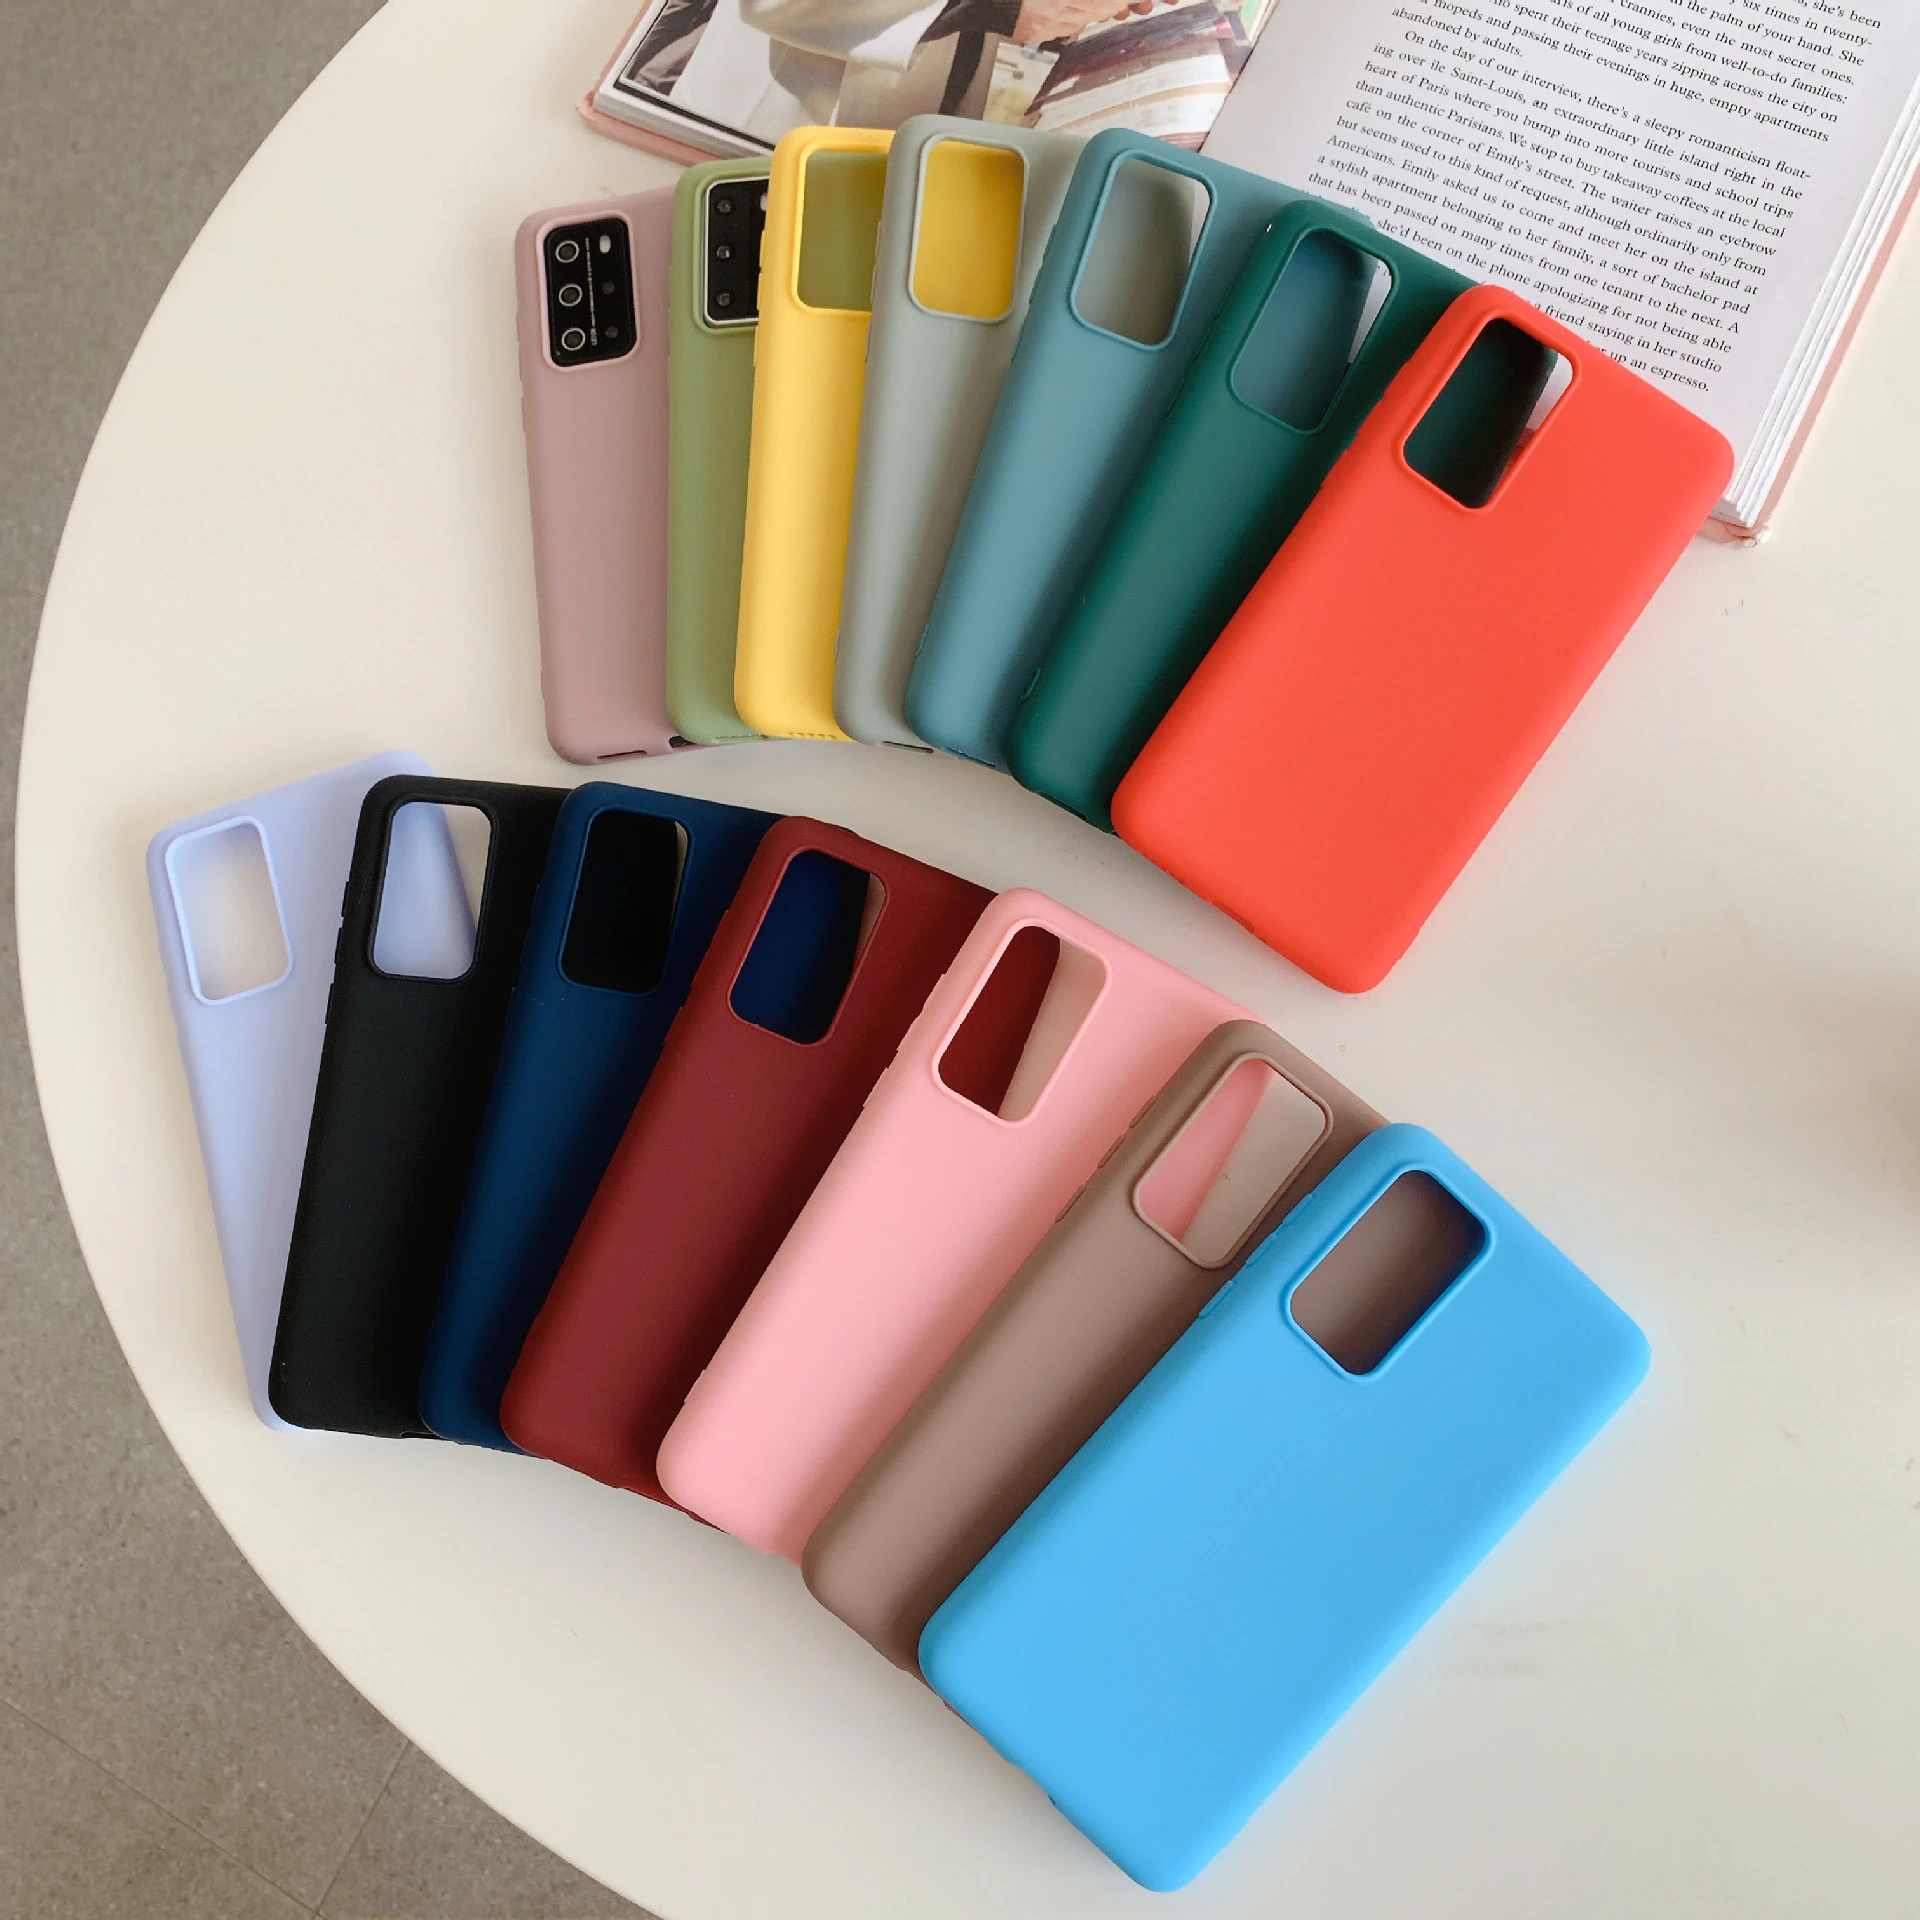 Candy Color Silicone Phone Case for Samsung Galaxy S21 Ultra S20 FE S10E S10 Plus A02S A12 A32 A52 A72 A21S A51 A71 Matte Cover